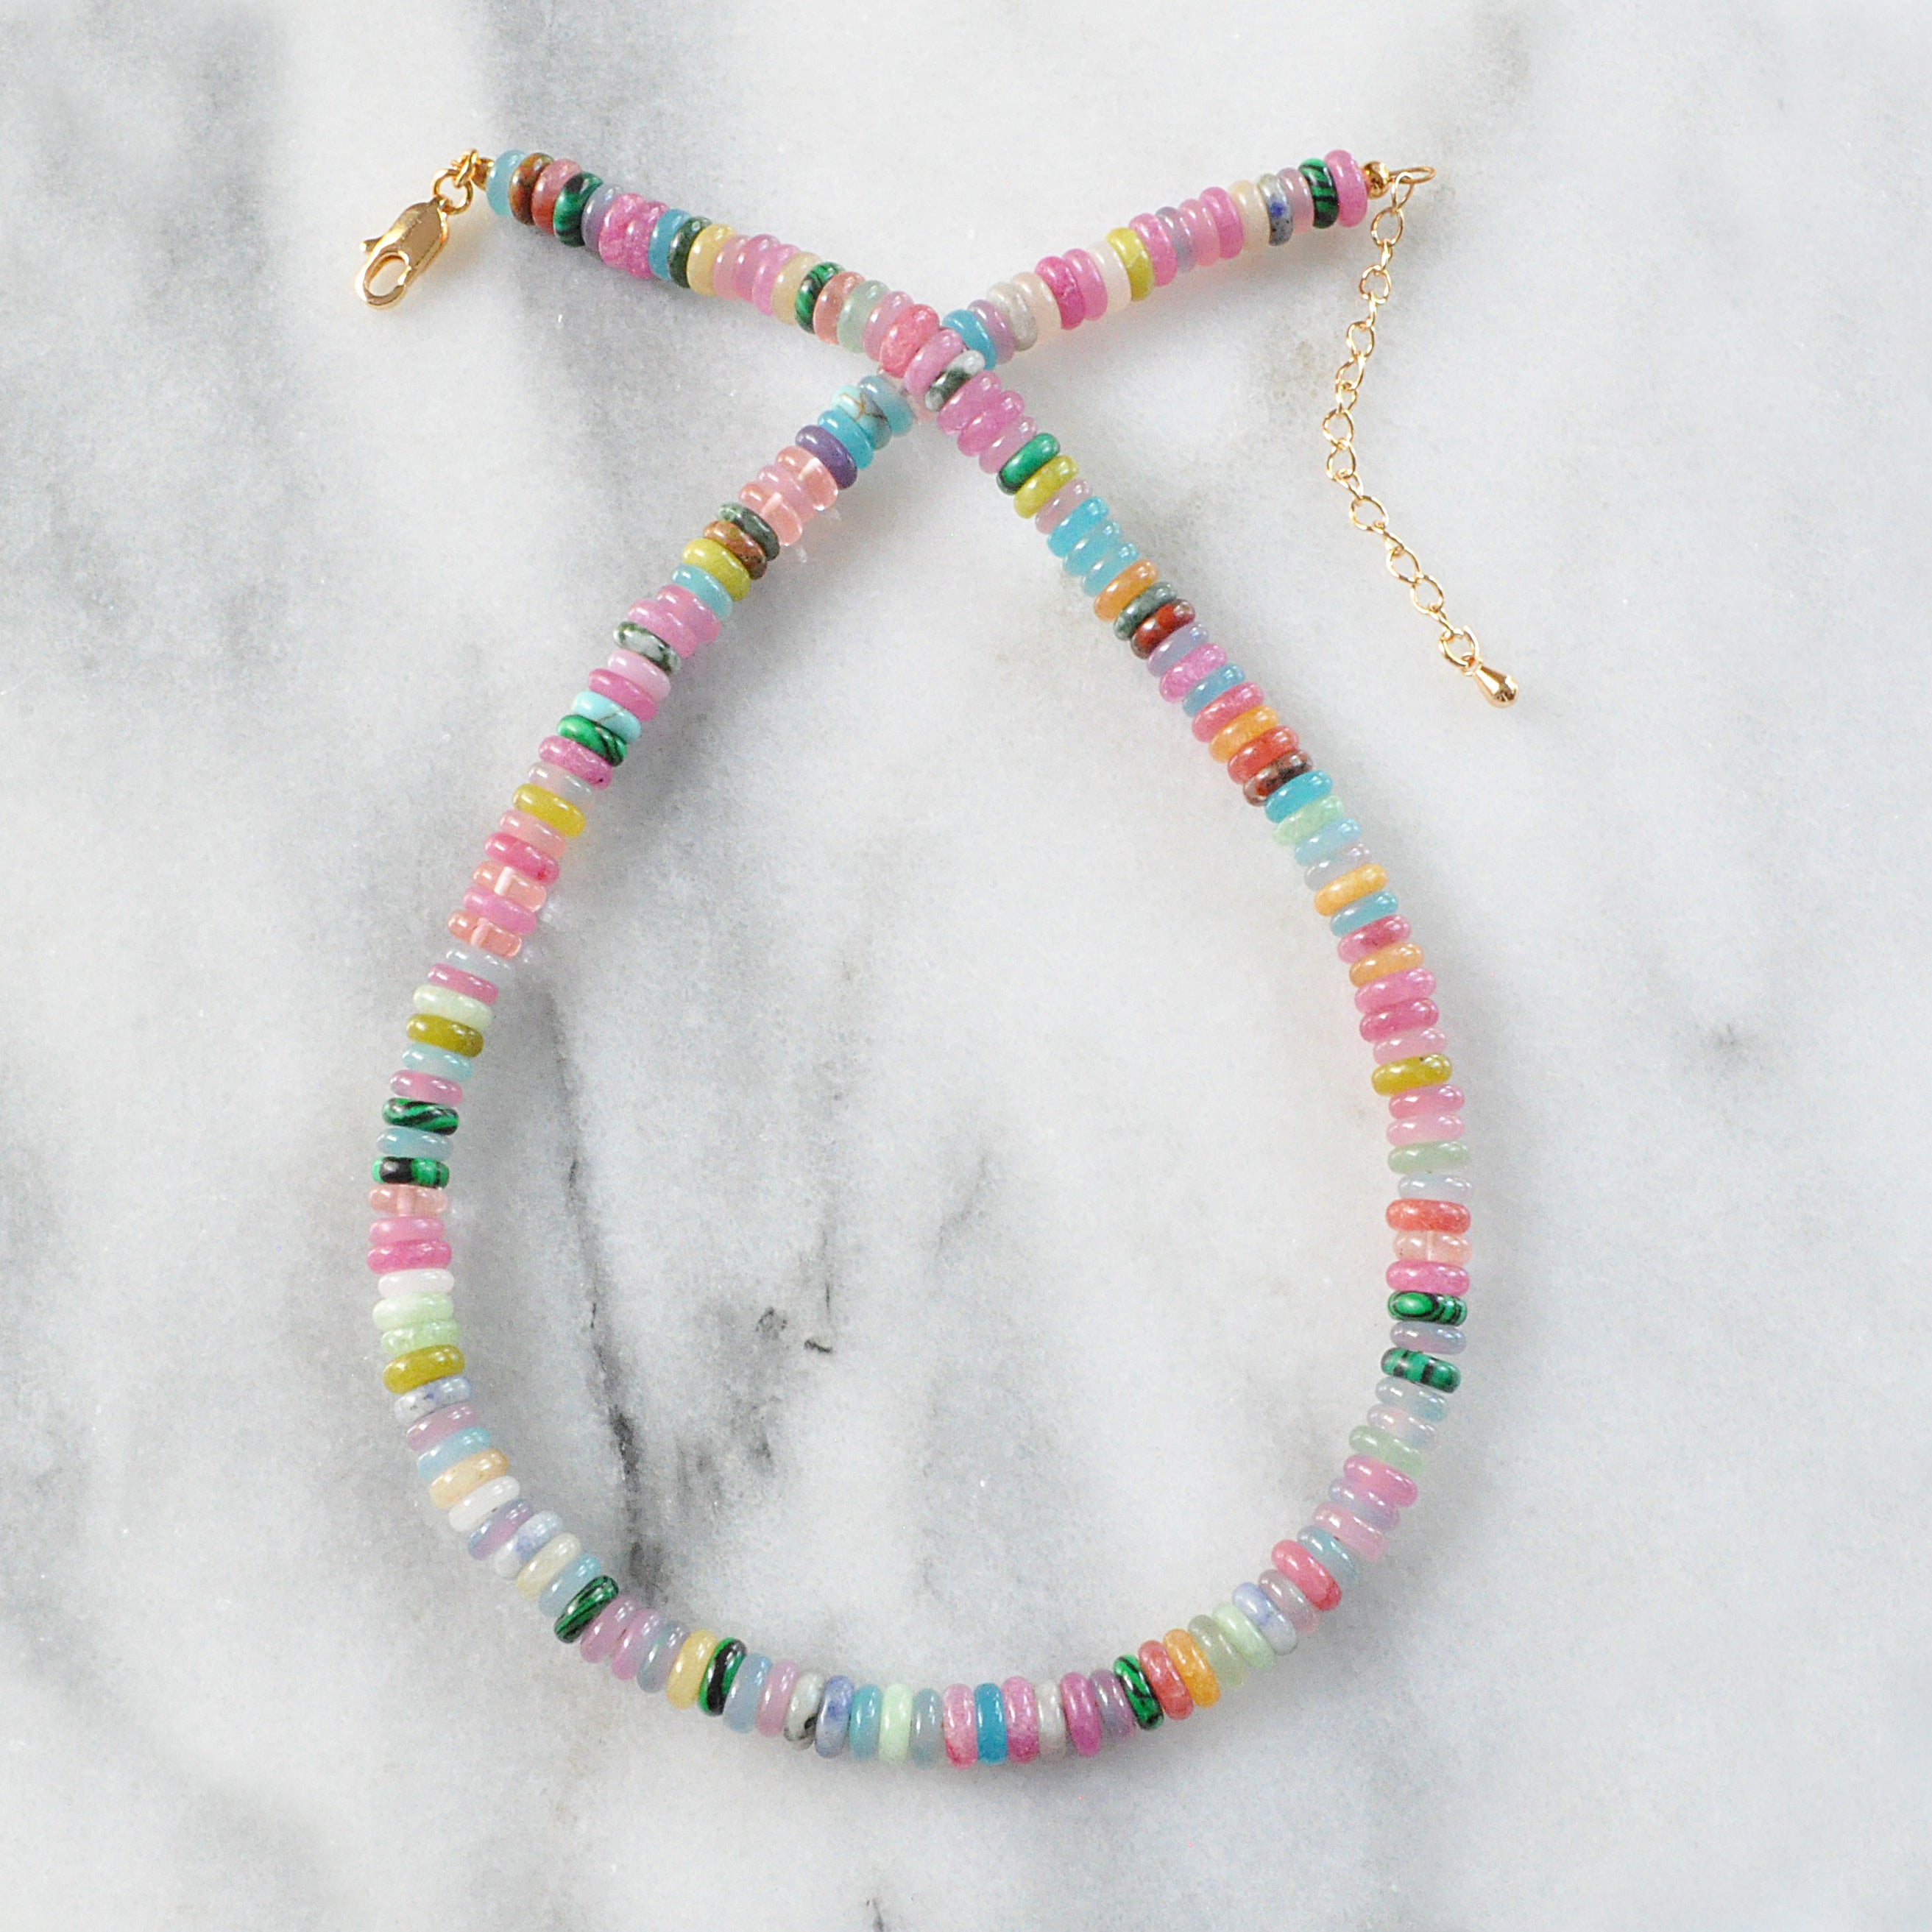 Tiny Seed Bead Necklace  Handmade by Libby & Smee